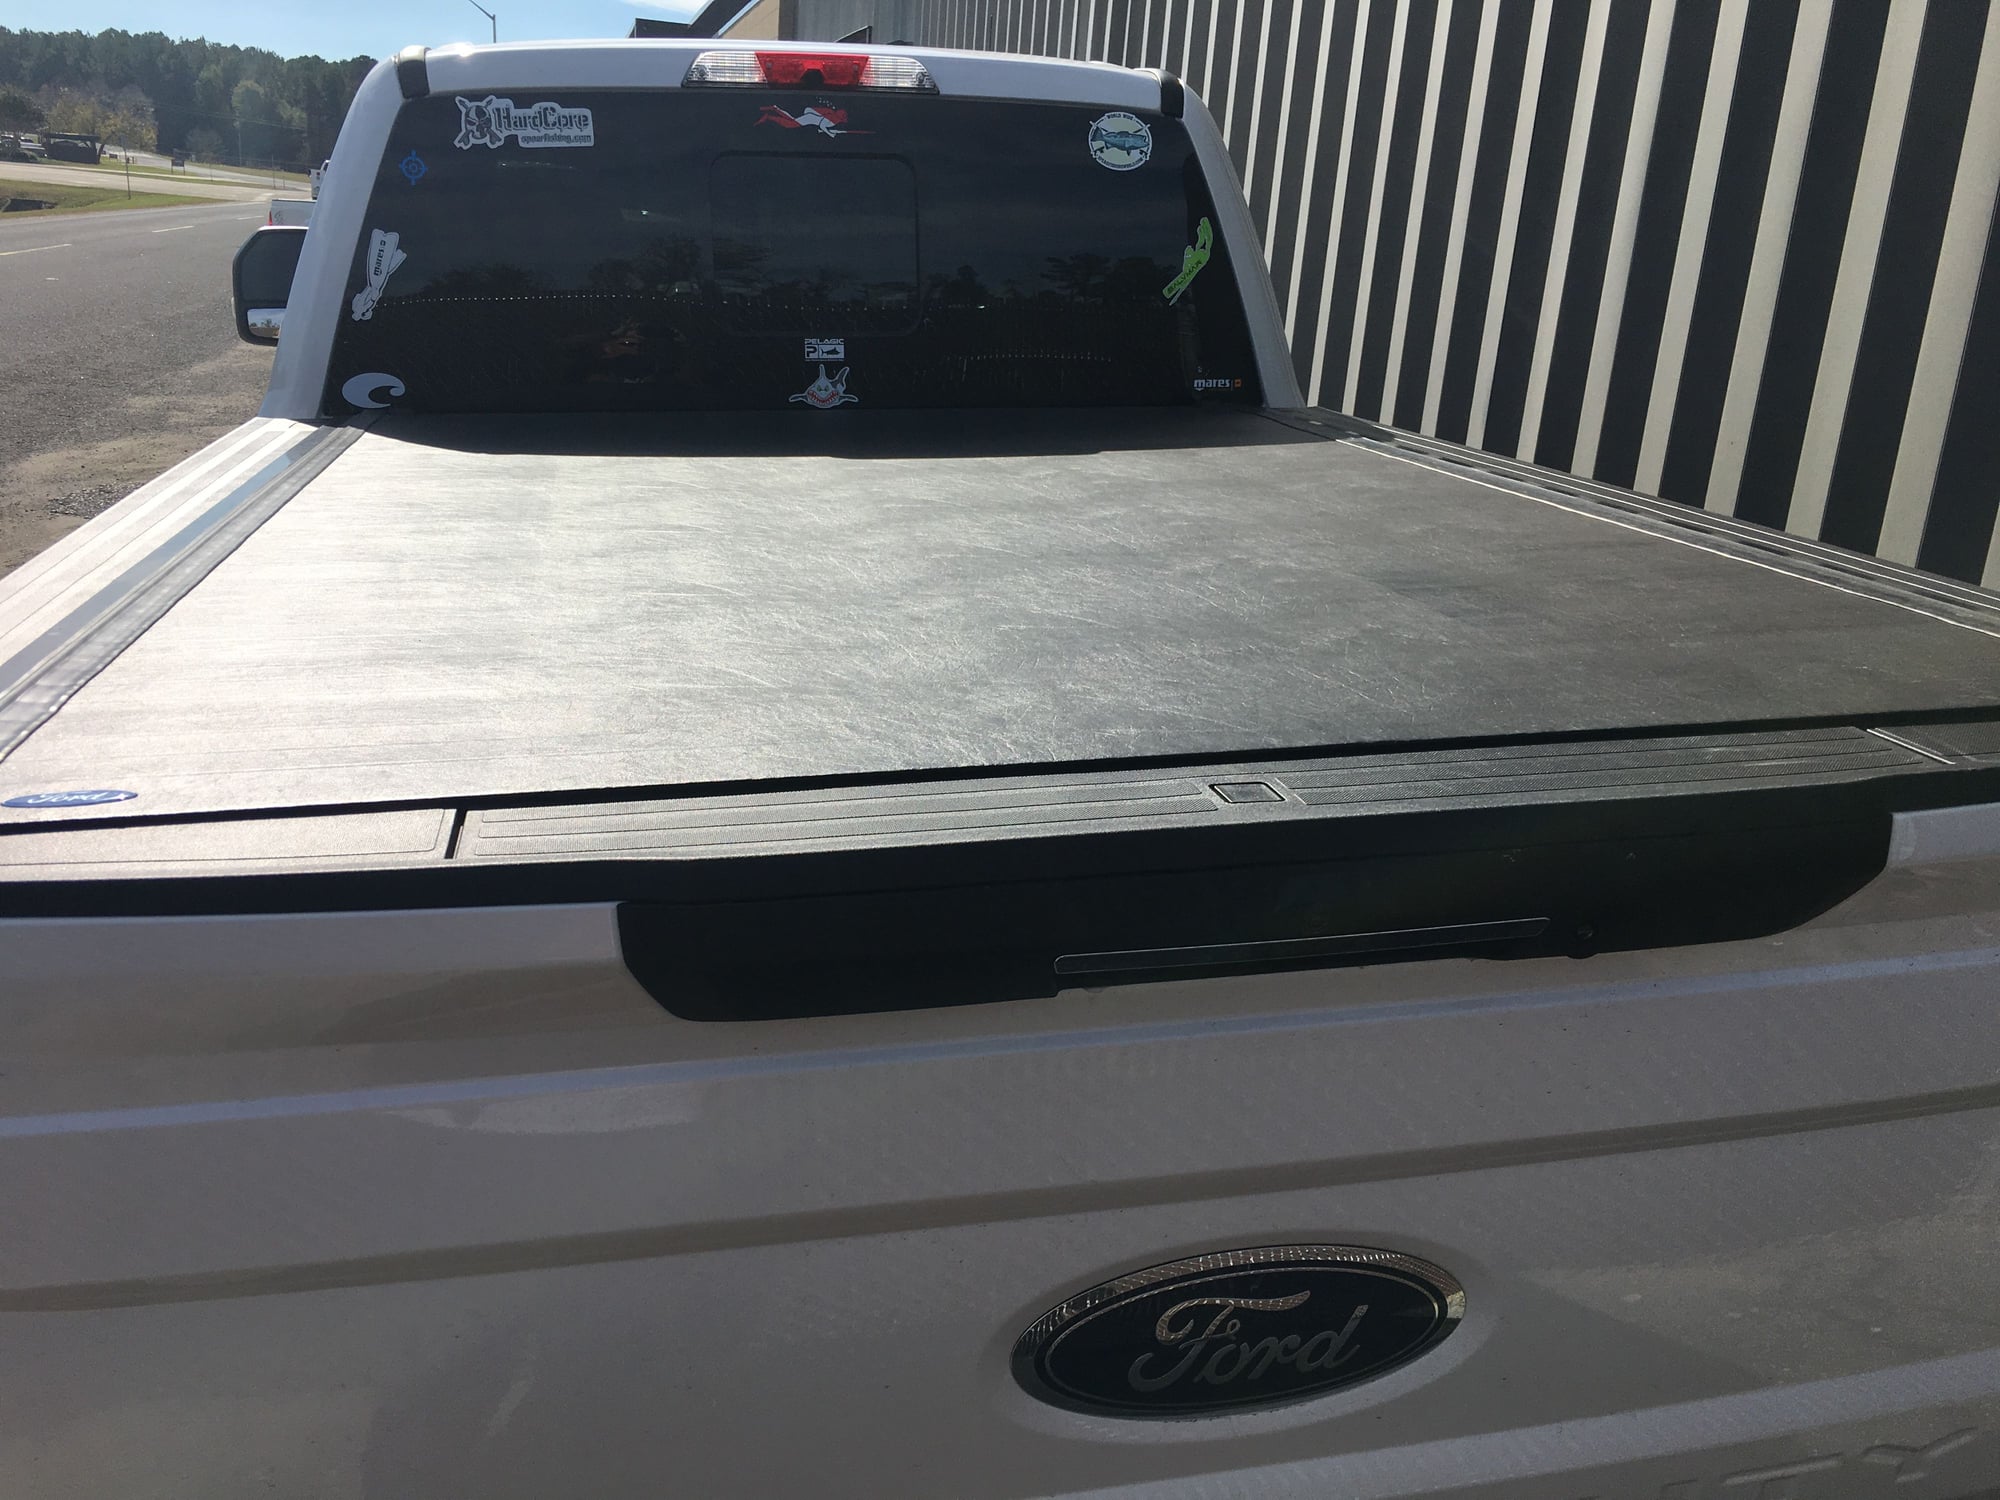 Miscellaneous - Bed cover - Used - 2017 to 2019 Ford F-250 Super Duty - Trussville, AL 35173, United States